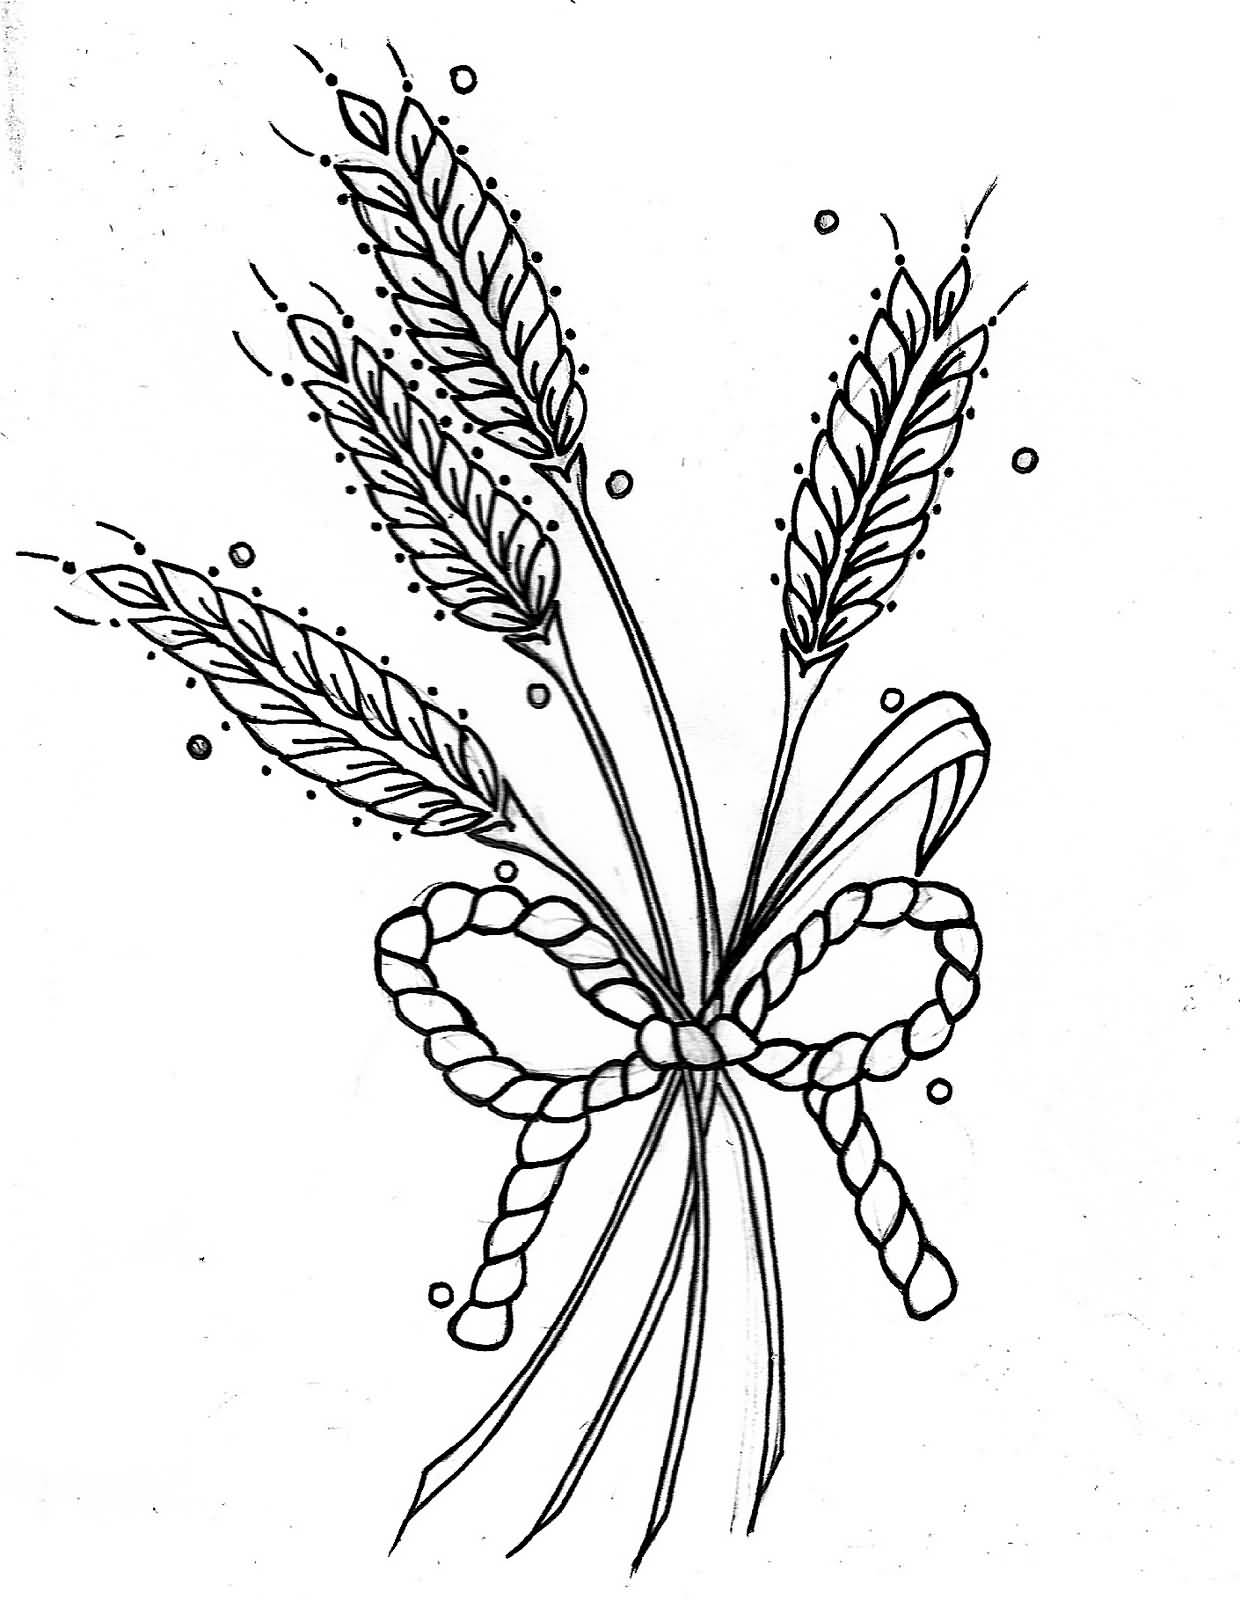 Wheat Stalk Drawing at GetDrawings.com | Free for personal use Wheat ...